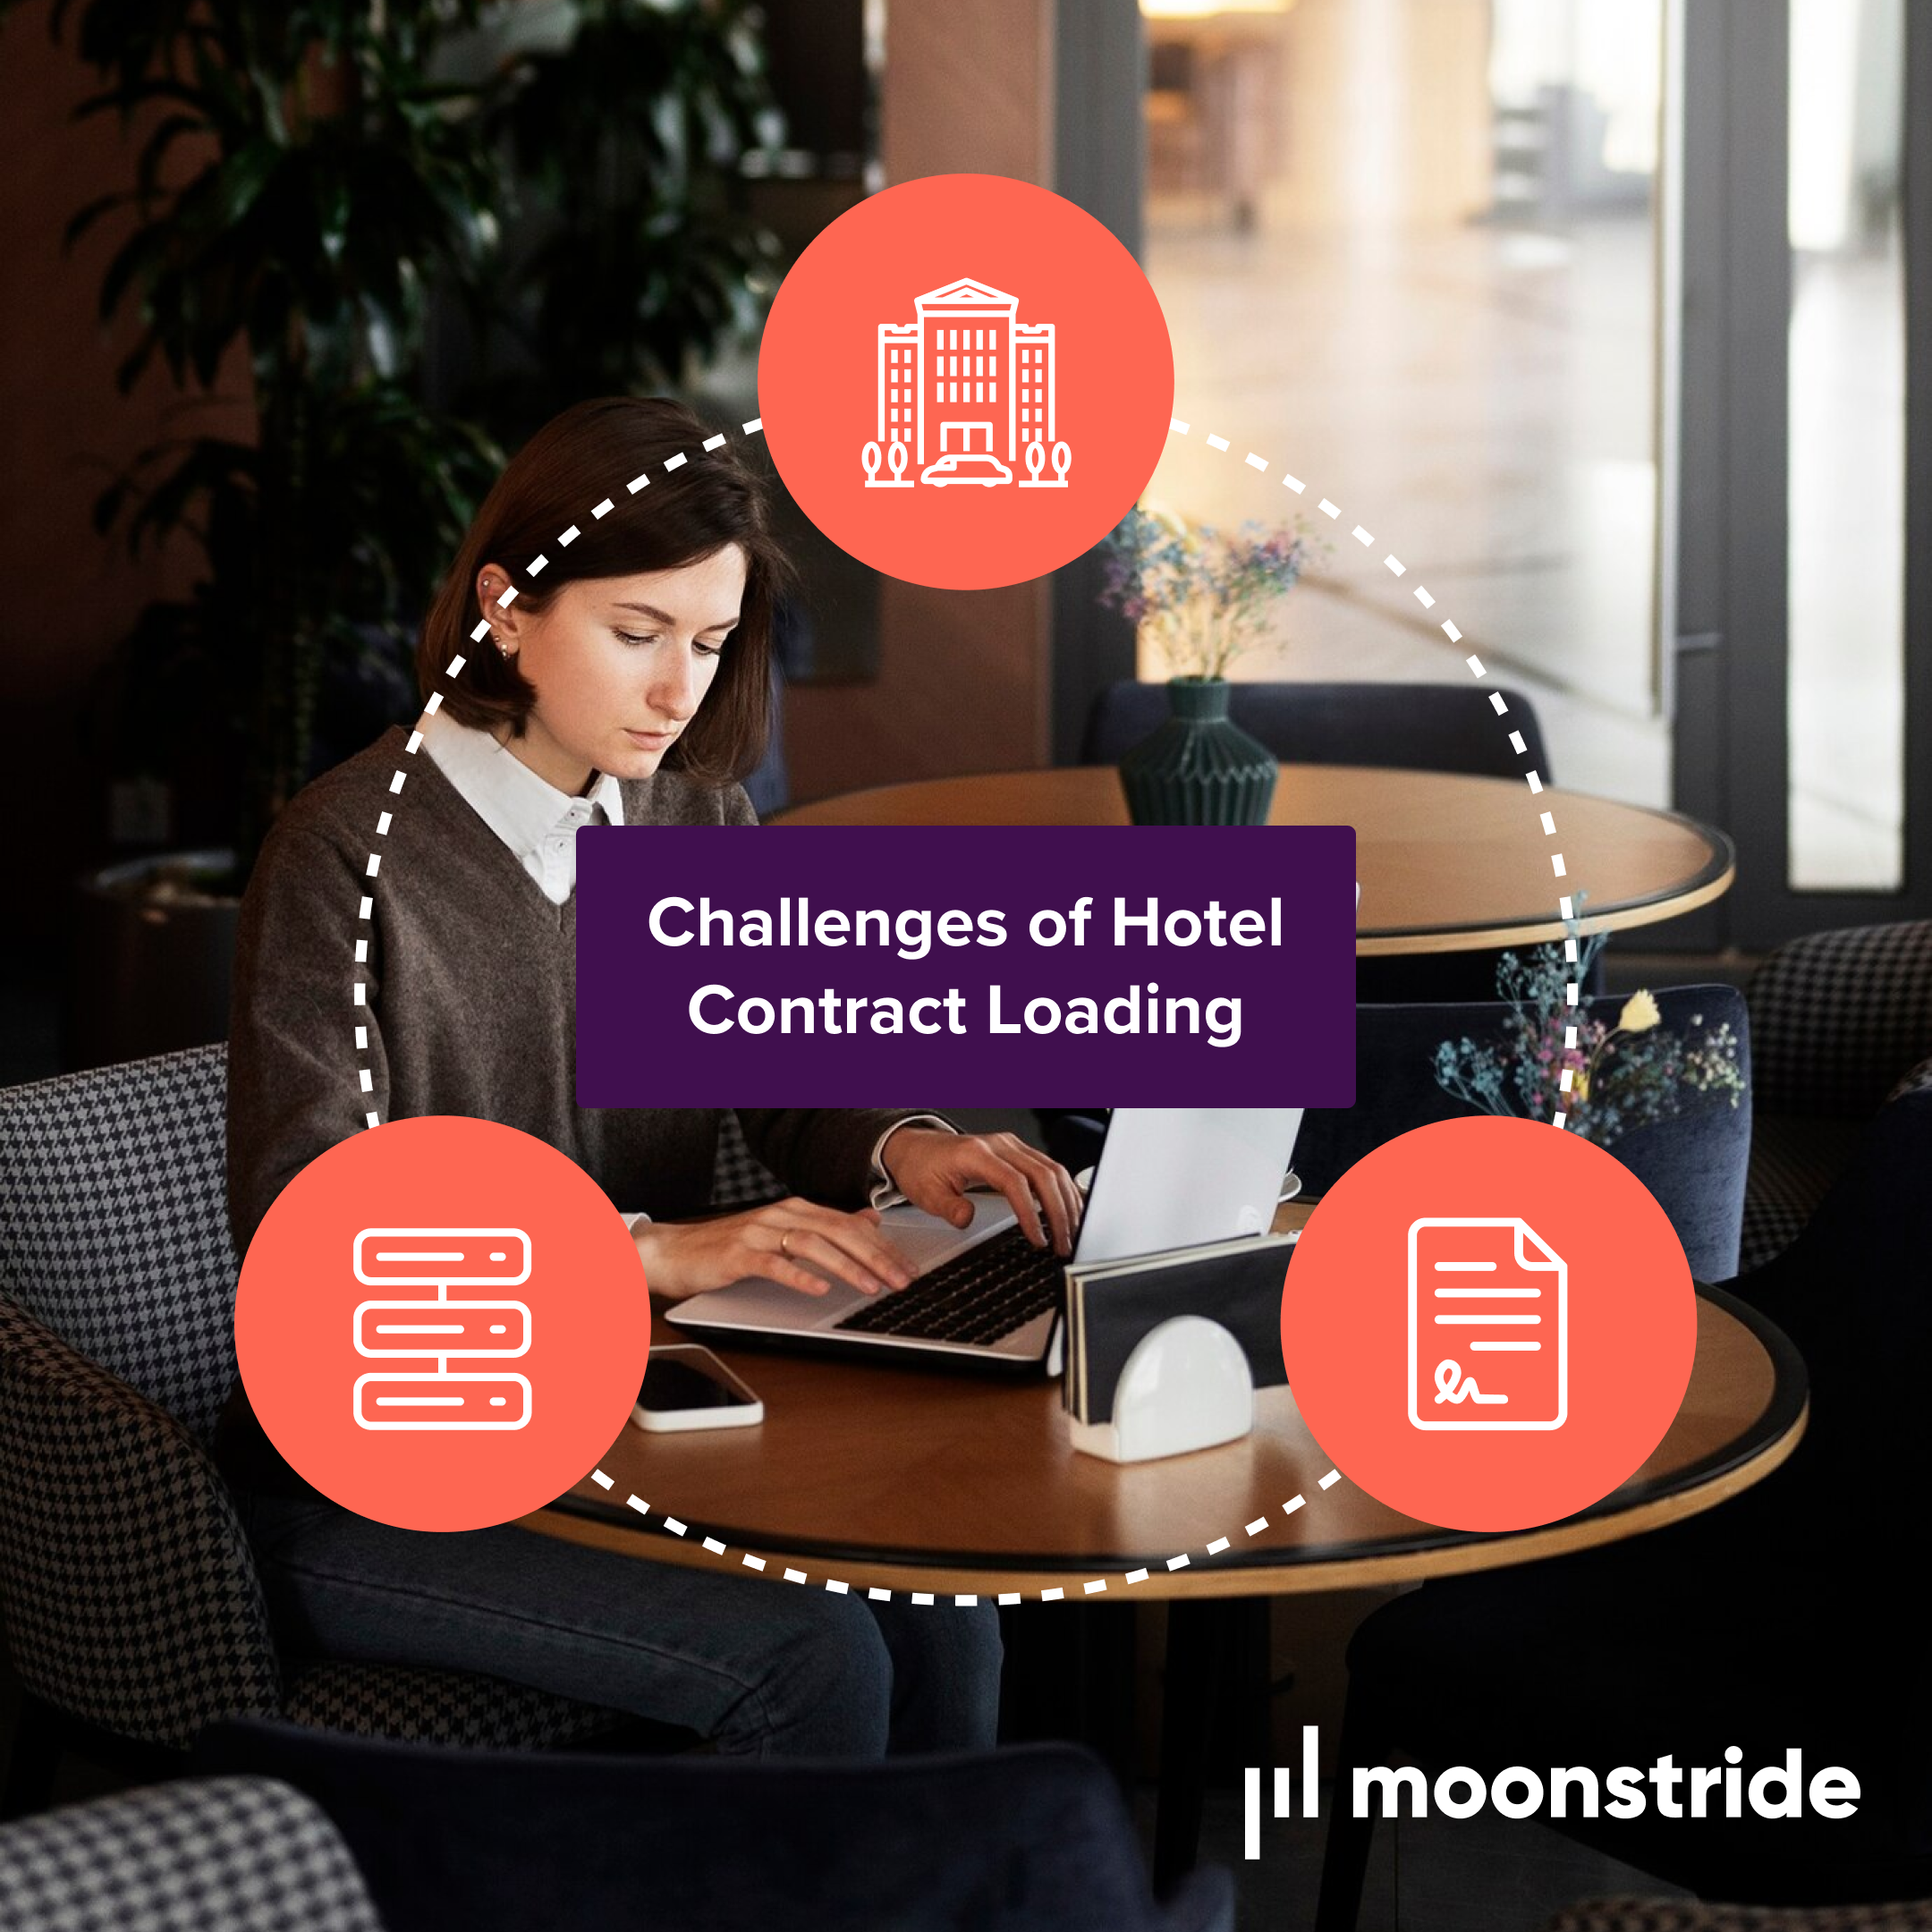 Guide to Navigate the Challenges of Hotel Contract Loading for Tour Operators